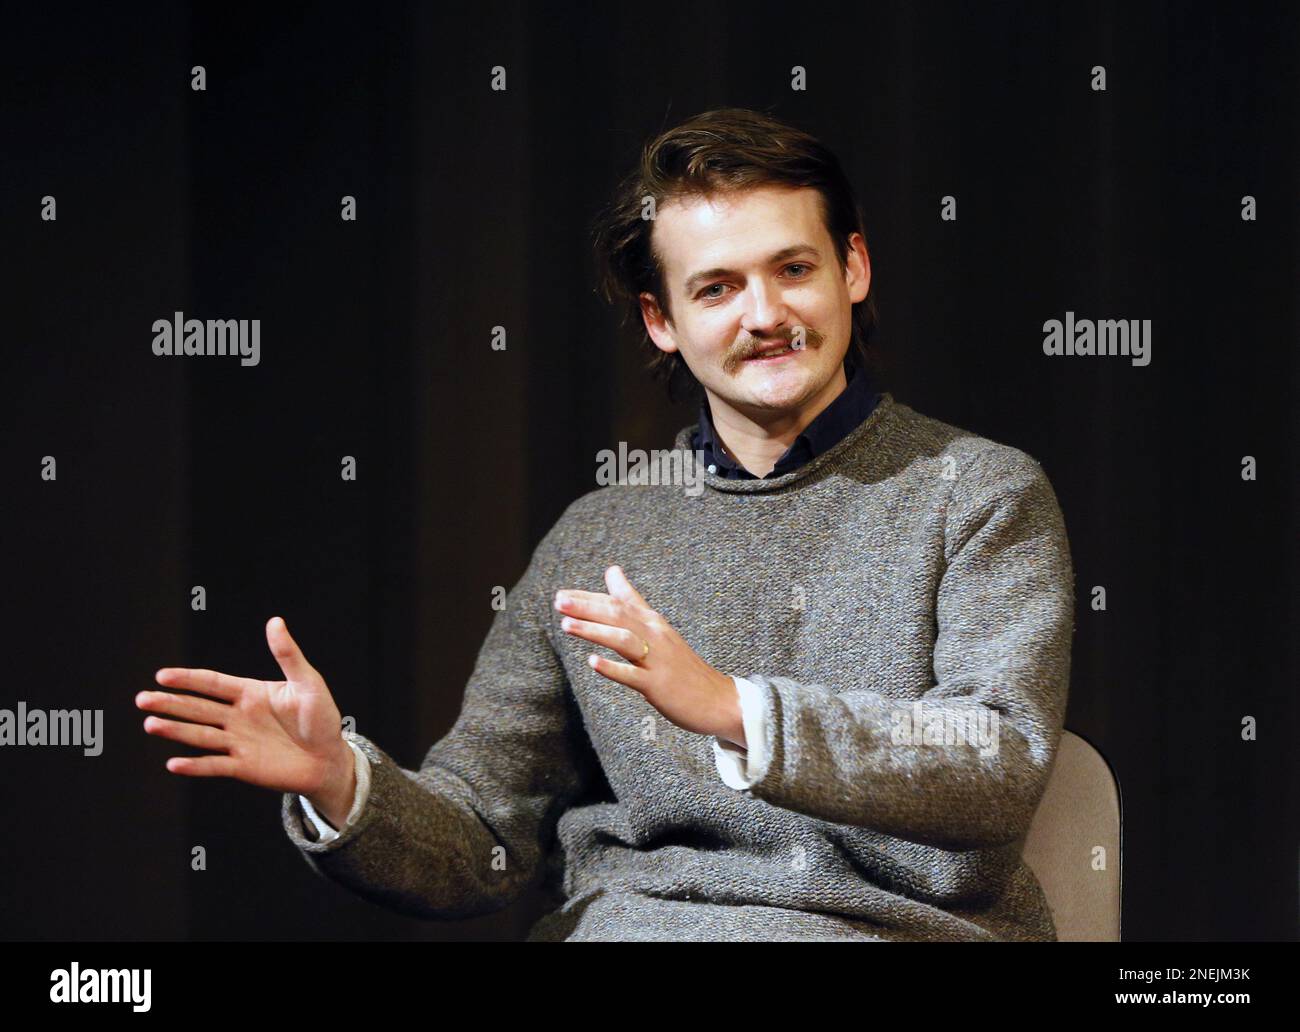 Kyiv, Ukraine 16 February 2023, Actor Jack Gleeson attends a meeting with Ukrainian actors at the Kyiv Academic Theater of Young Spectators in Kyiv, Ukraine 16 February 2023, amid Russia's invasion of Ukraine. Irish actor Jack Gleeson, best known for his role as King Joffrey Baratheon in the TV HBO series ''Game of Thrones'', came to Ukraine for several days to meet with fans and support the Ukrainian military, according to media. He along with his friends, brought a pickup truck, which was purchased by British volunteers for the Armed Forces of Ukraine, according to media. The actor will take Stock Photo